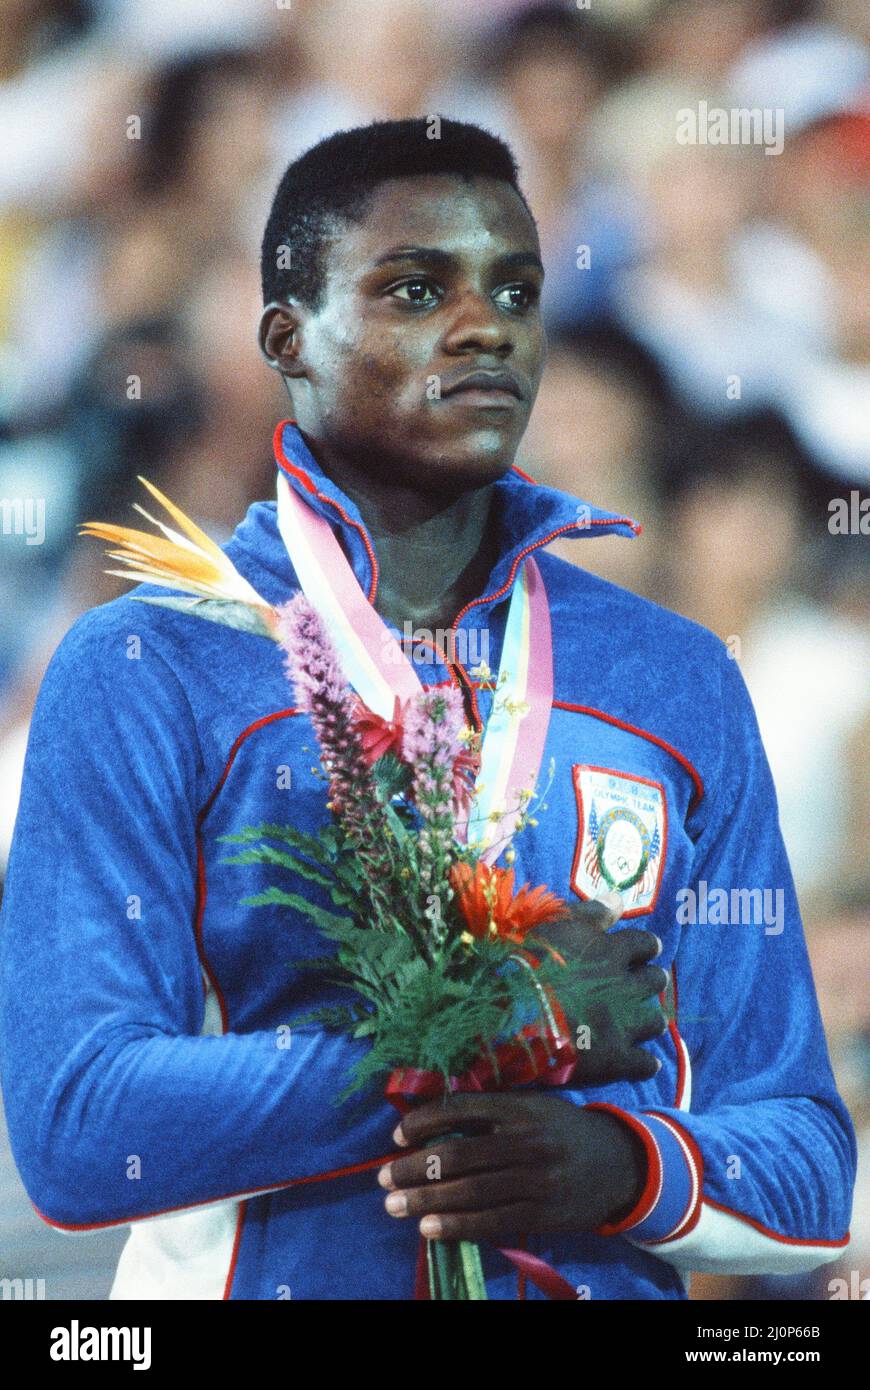 1984 Olympic Games in Los Angeles, USA. American athlete Carl Lewis, gold medal winner in the 100 metres, the long jump, the 200 metres and the 4 x 100 metres relay. Here he is pictured on the podium with silver medal winning compatriot Kirk Baptiste after the 200 Metres Final. August 1984. Stock Photo